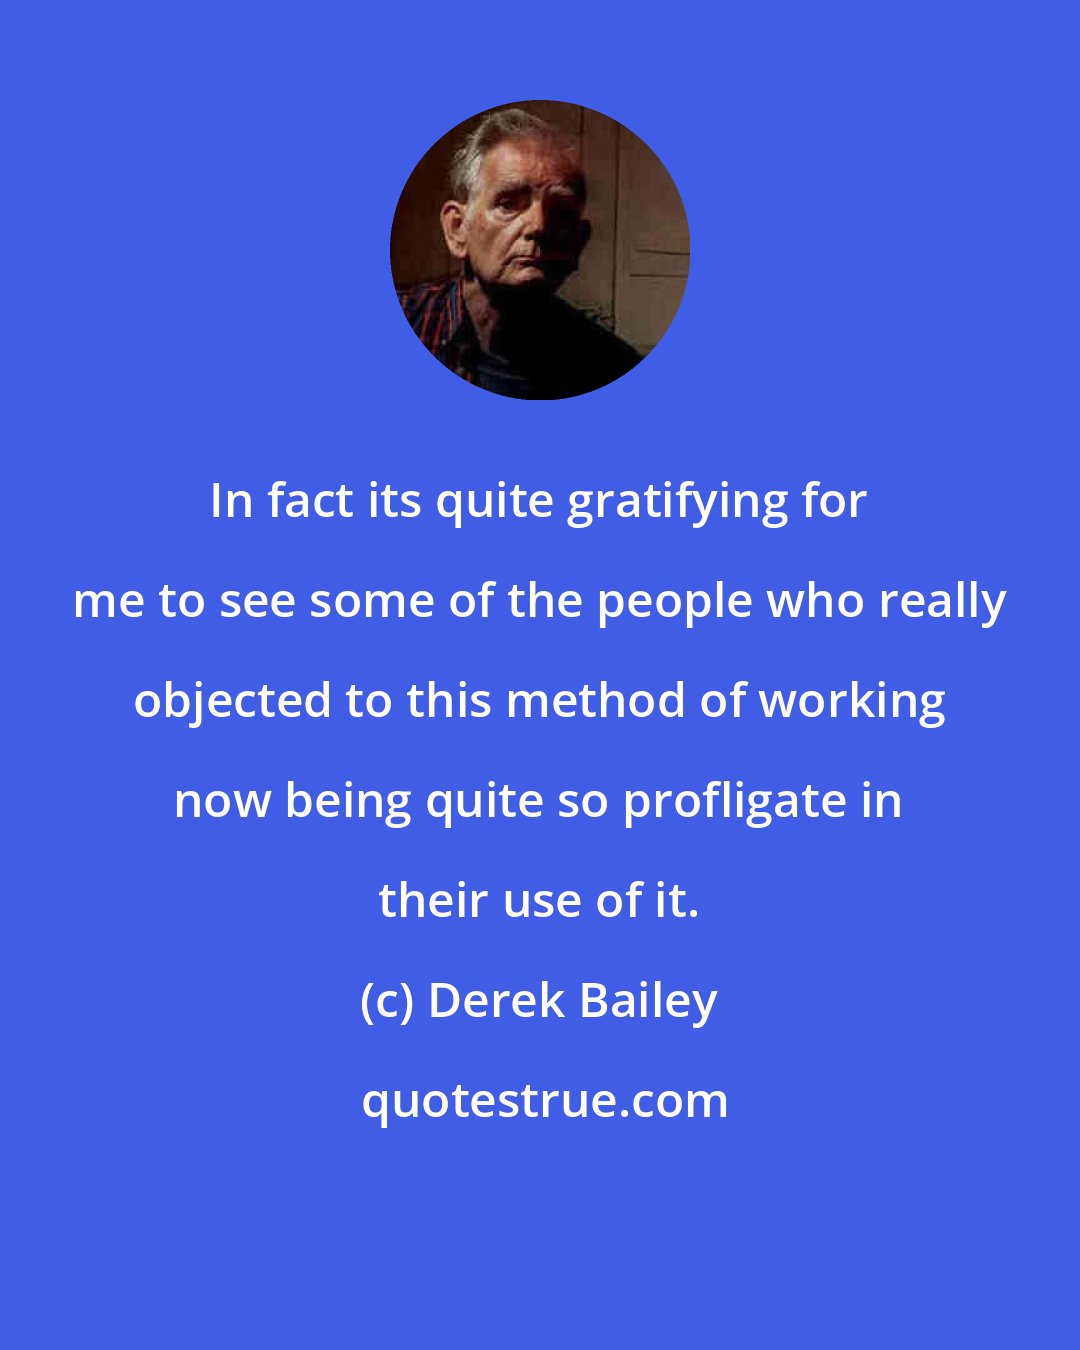 Derek Bailey: In fact its quite gratifying for me to see some of the people who really objected to this method of working now being quite so profligate in their use of it.